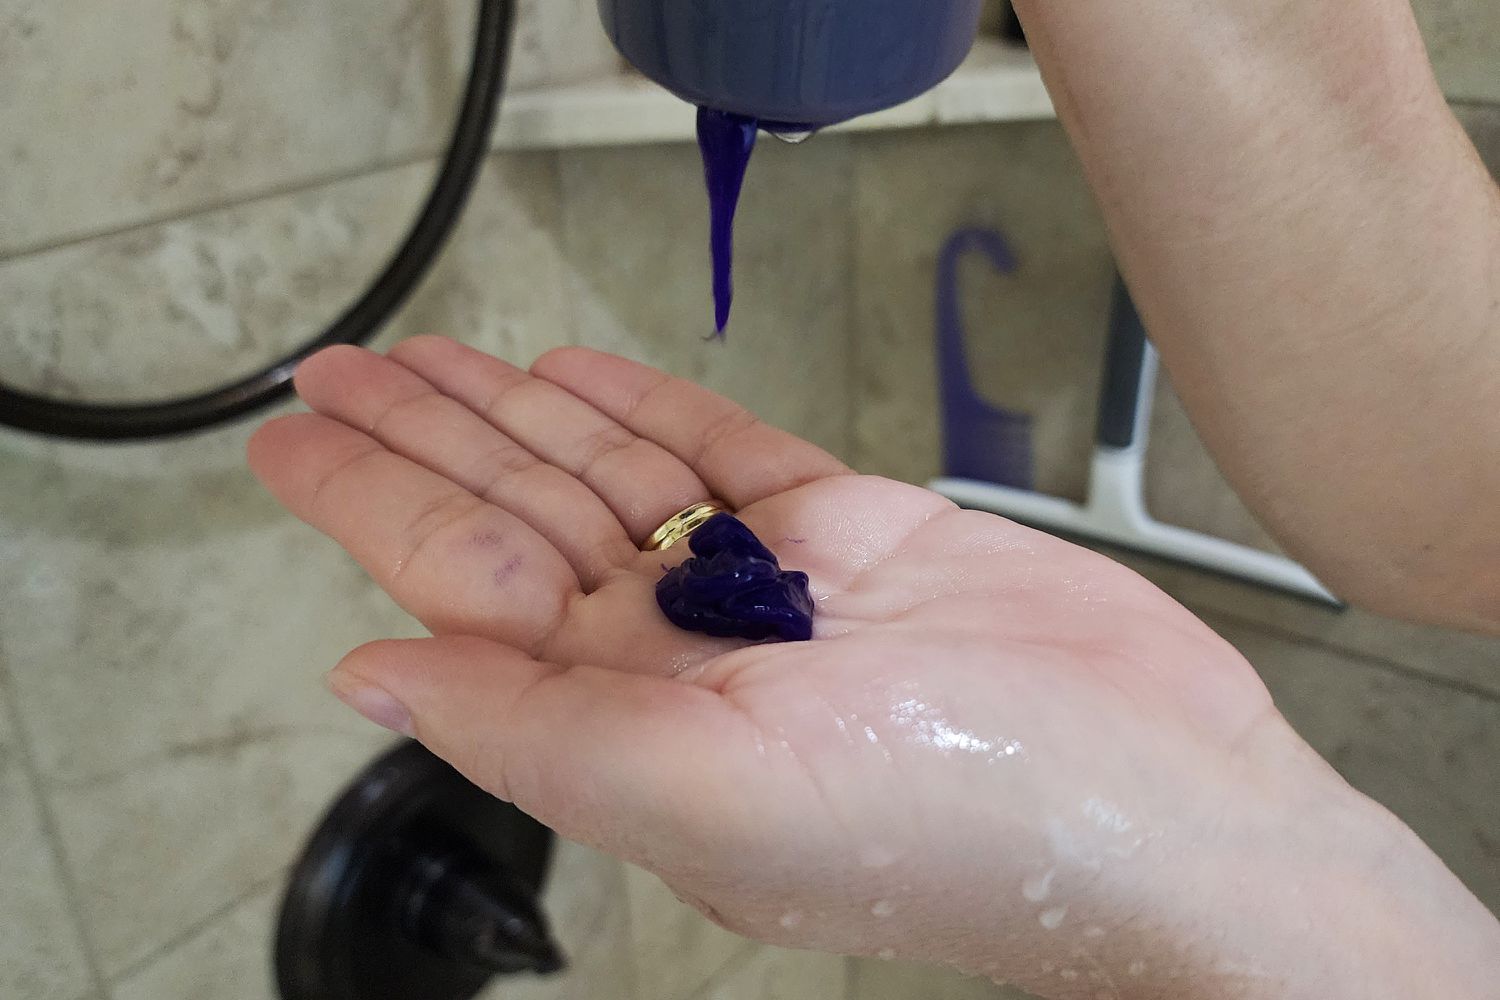 Kristin Ess The One Purple Shampoo squeezed into the palm of a hand 